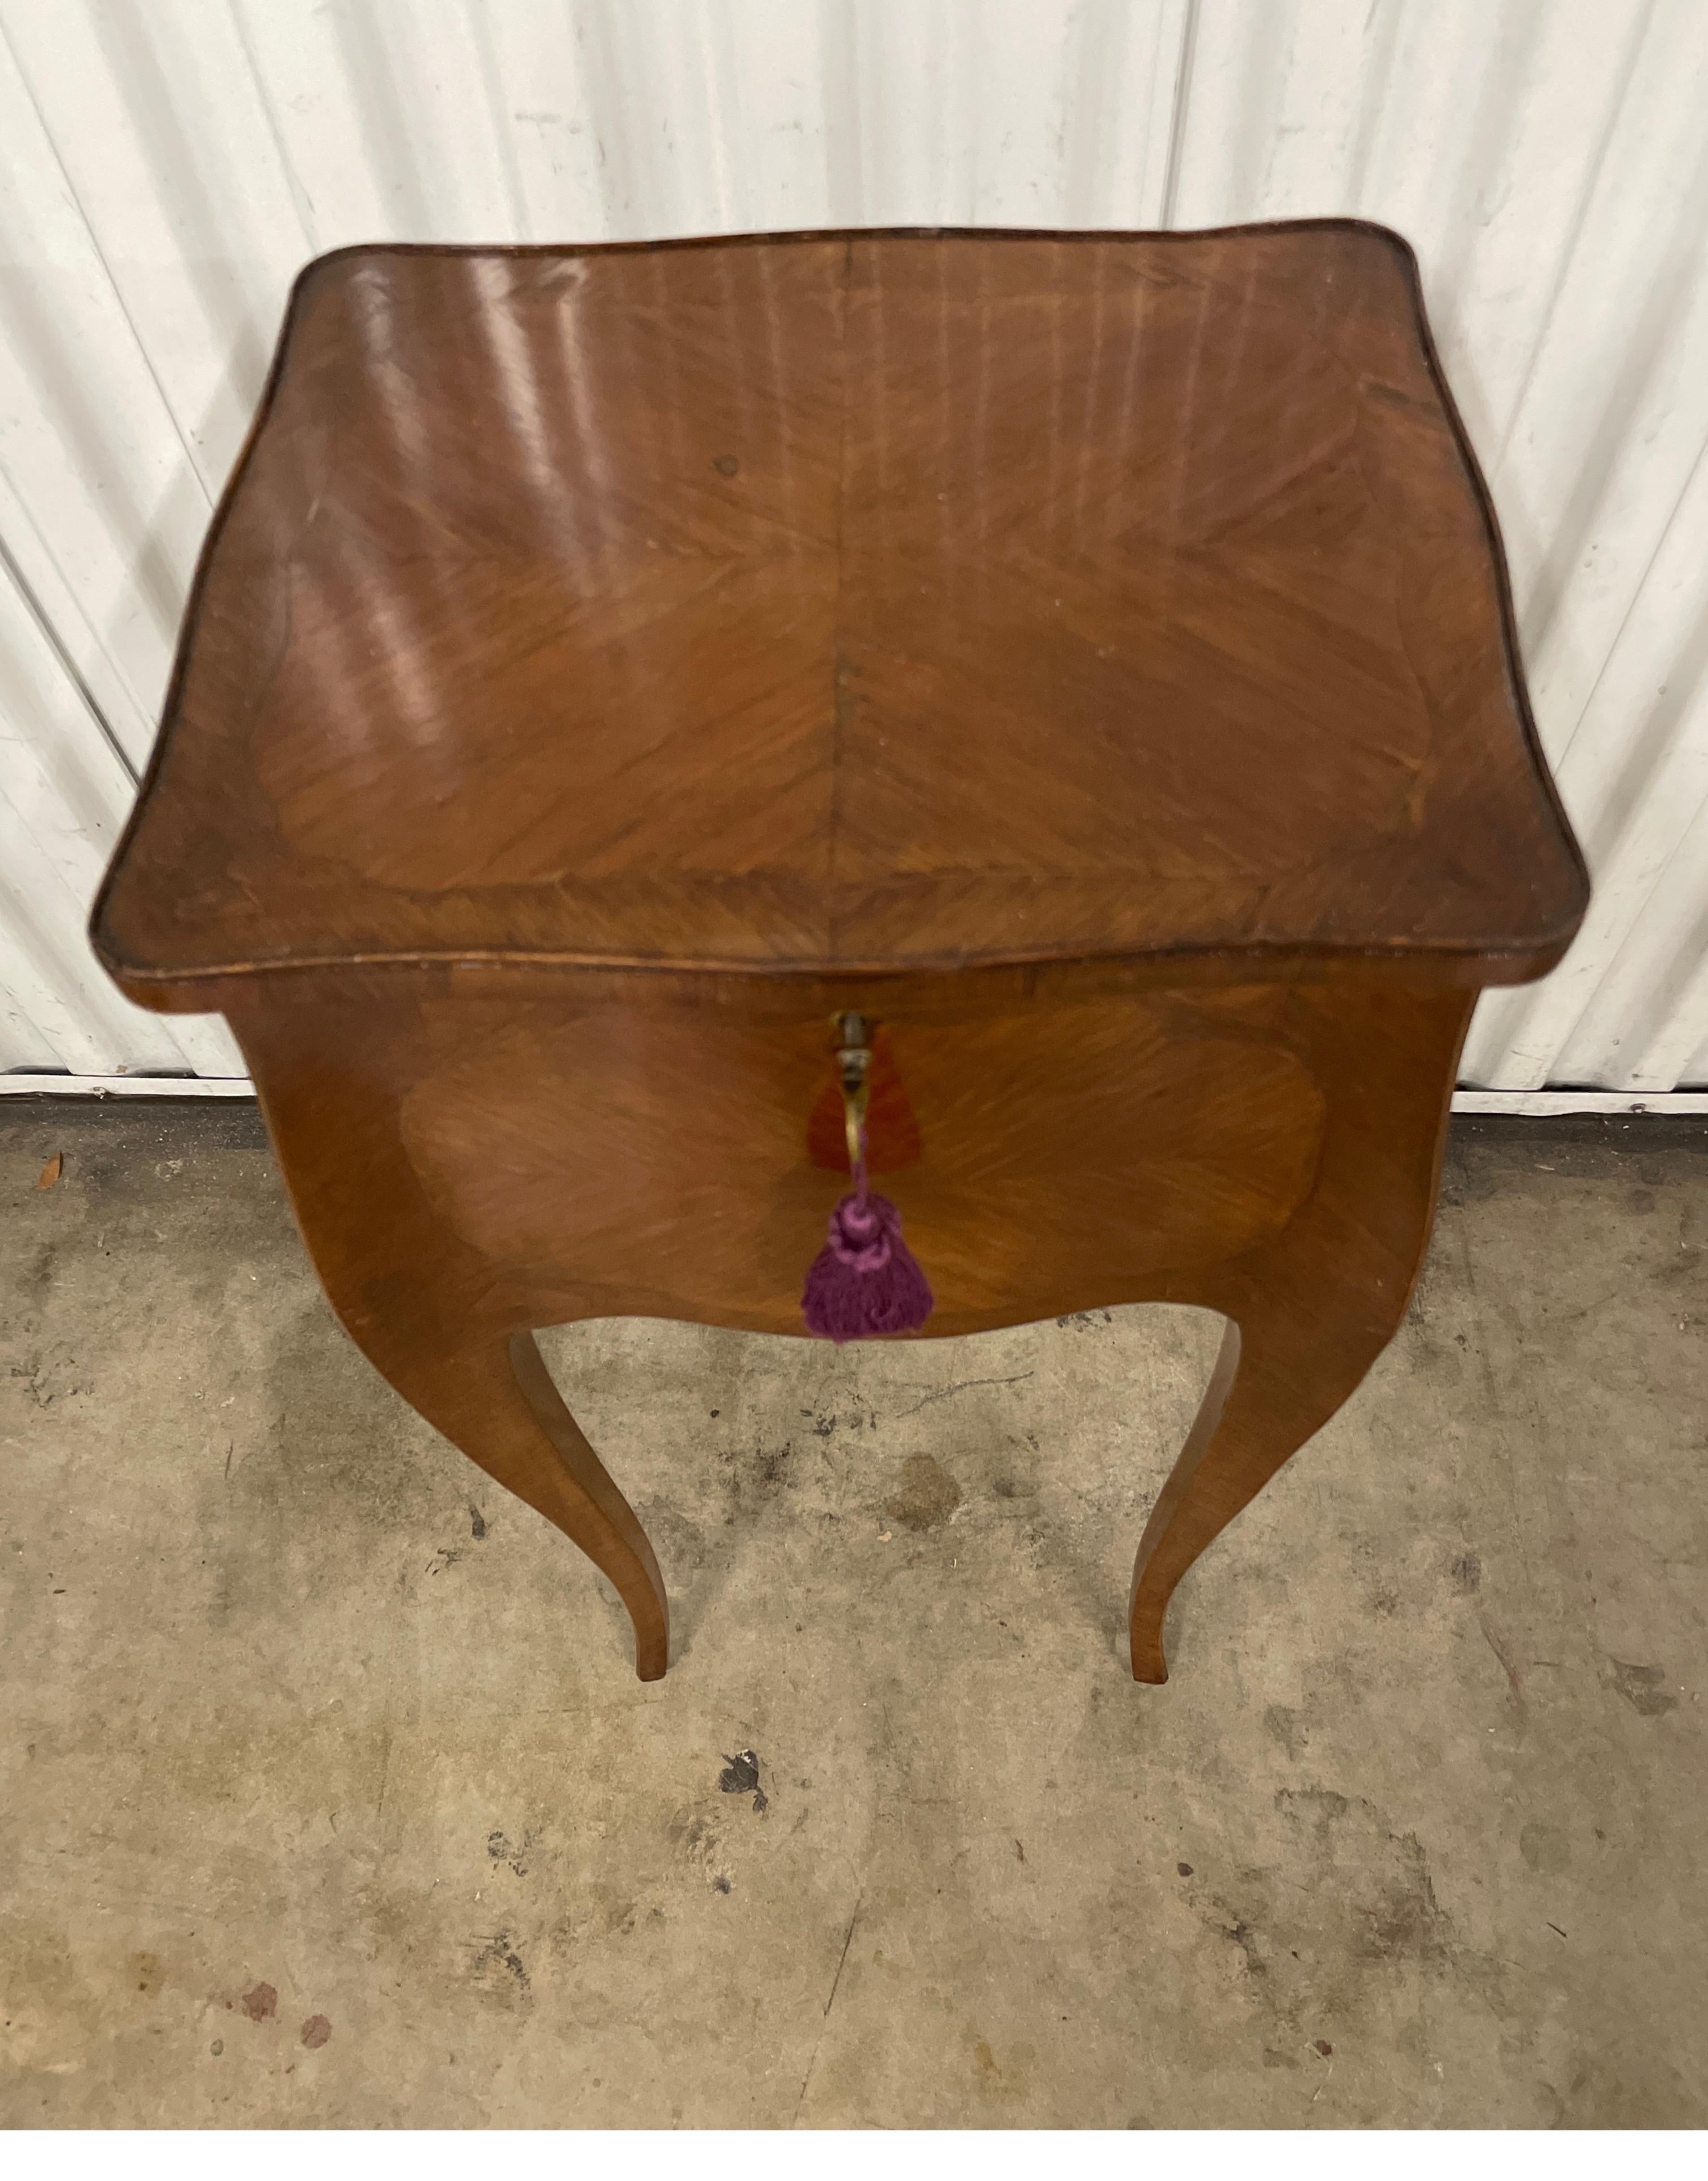 Petite Louis XV Style French sewing table. Top lifts up to four section compartment. This section can be removed to allow more storage below.
A lovely little side / drinks table.